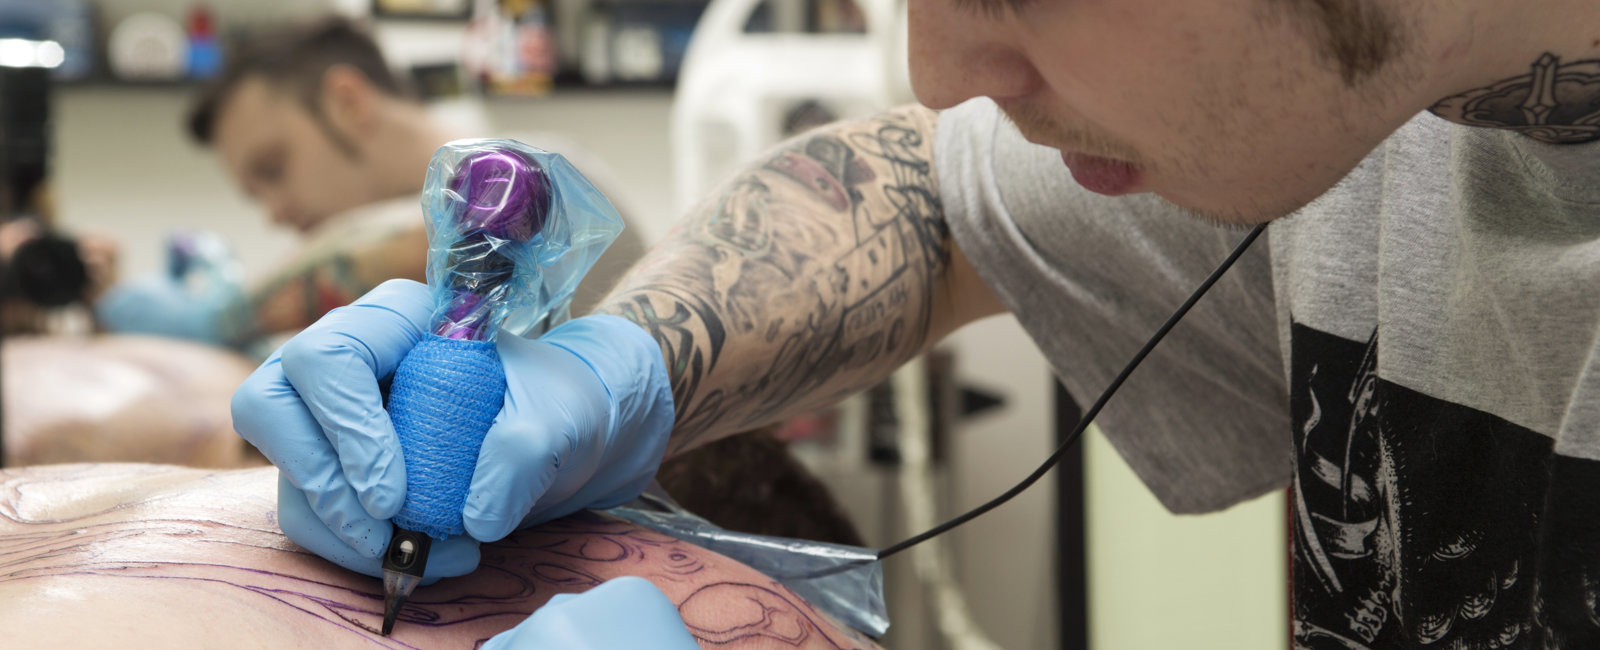 Online fire marshal training suitable for tattooist and tattooing studios